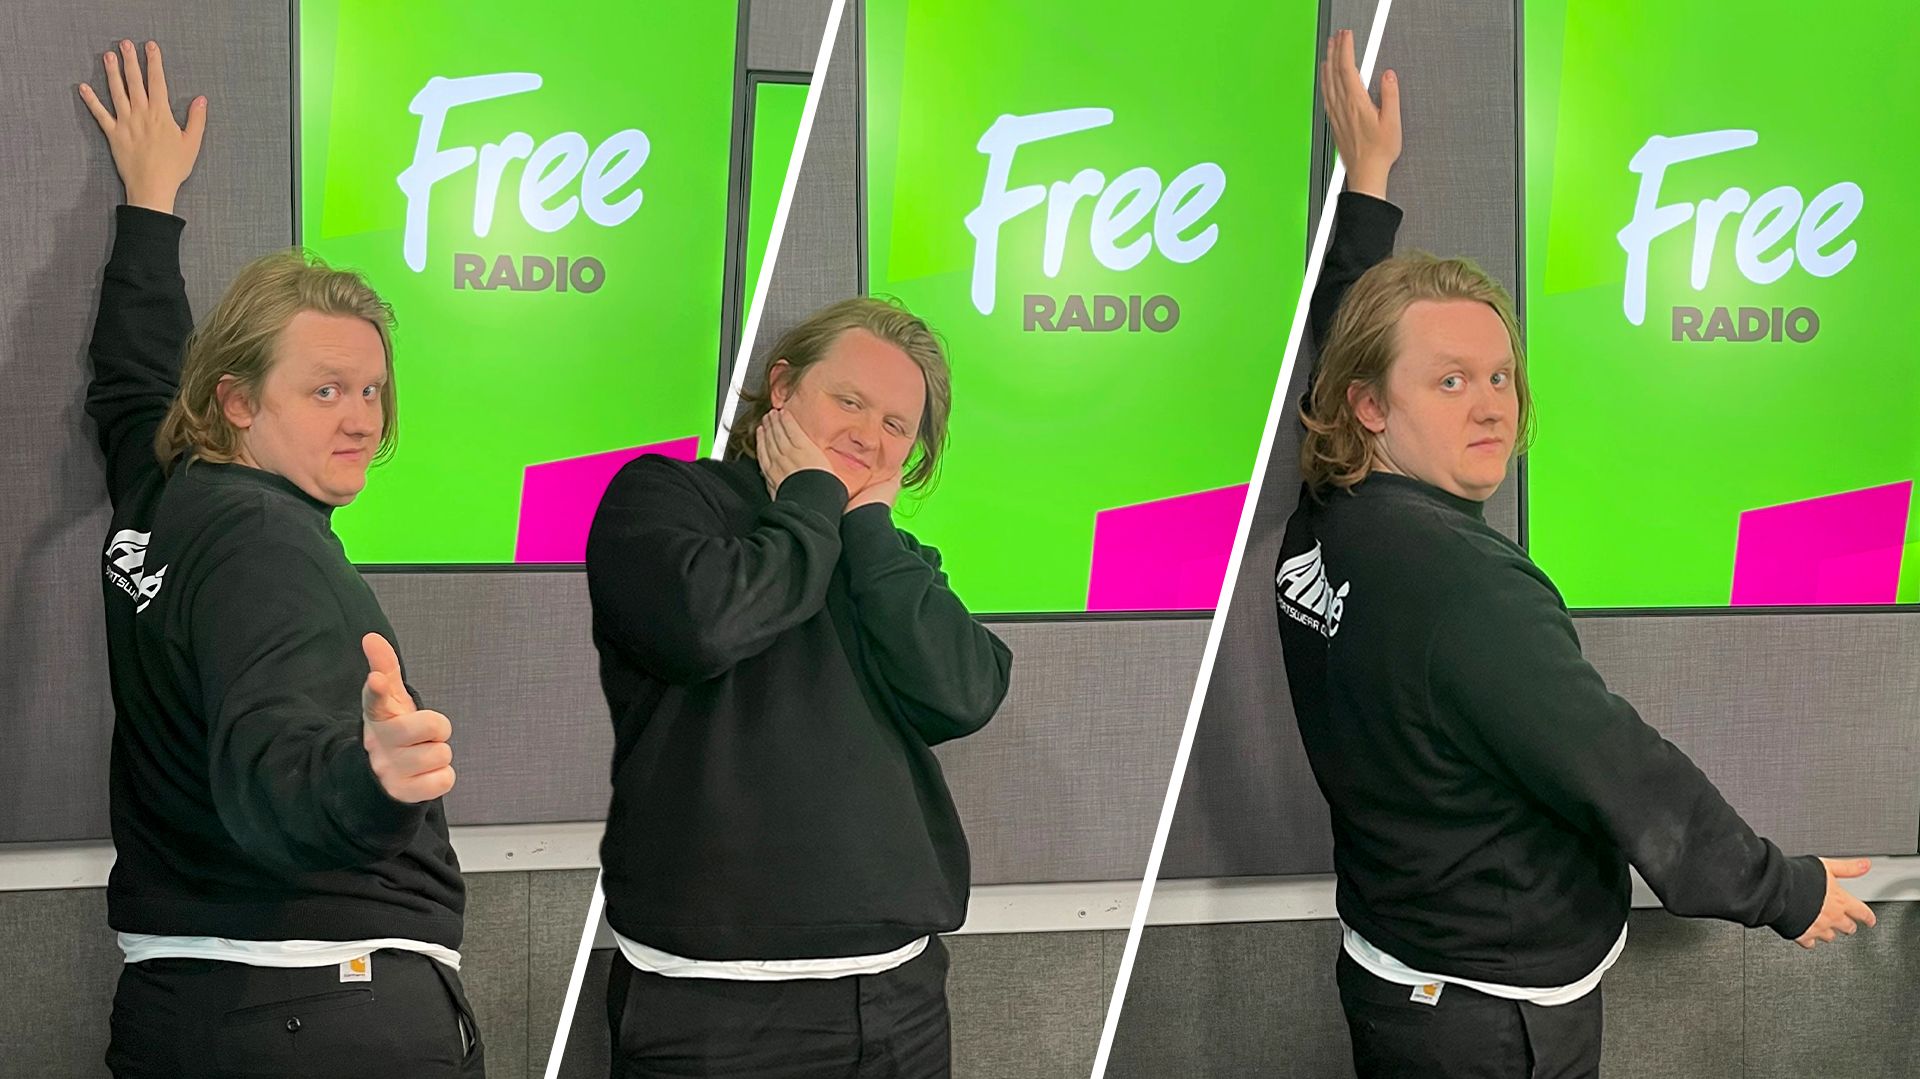 OUT TODAY: Lewis Capaldi's Debut Album - Divinely Uninspired To A